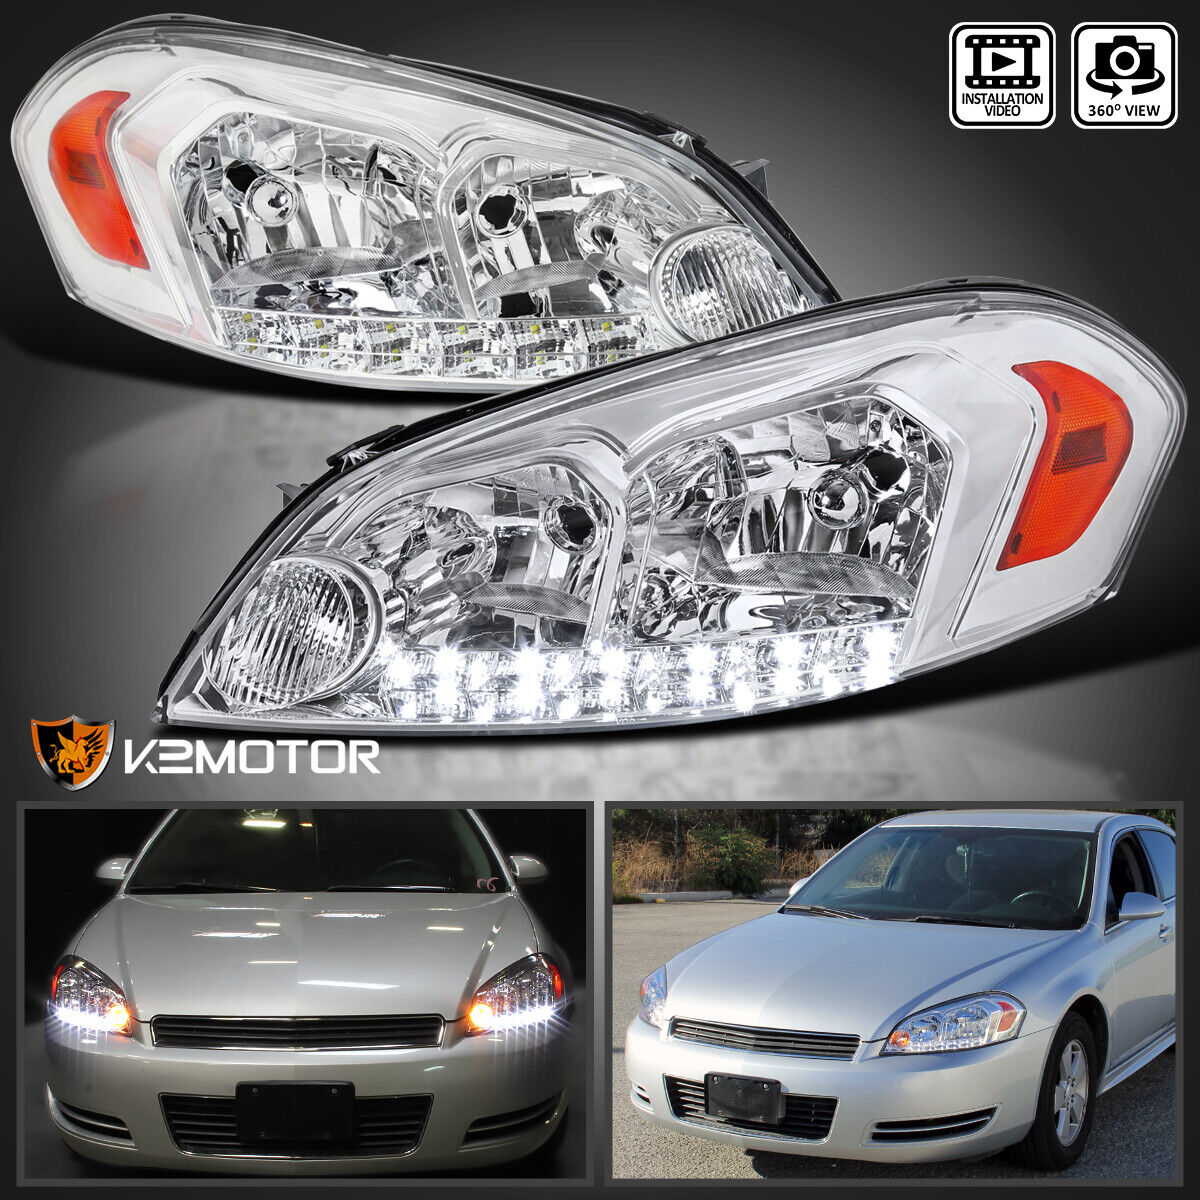 Fits 2006-2013 Chevy Impala 2006-2007 Monte Carlo LED Strip Headlights Lamps